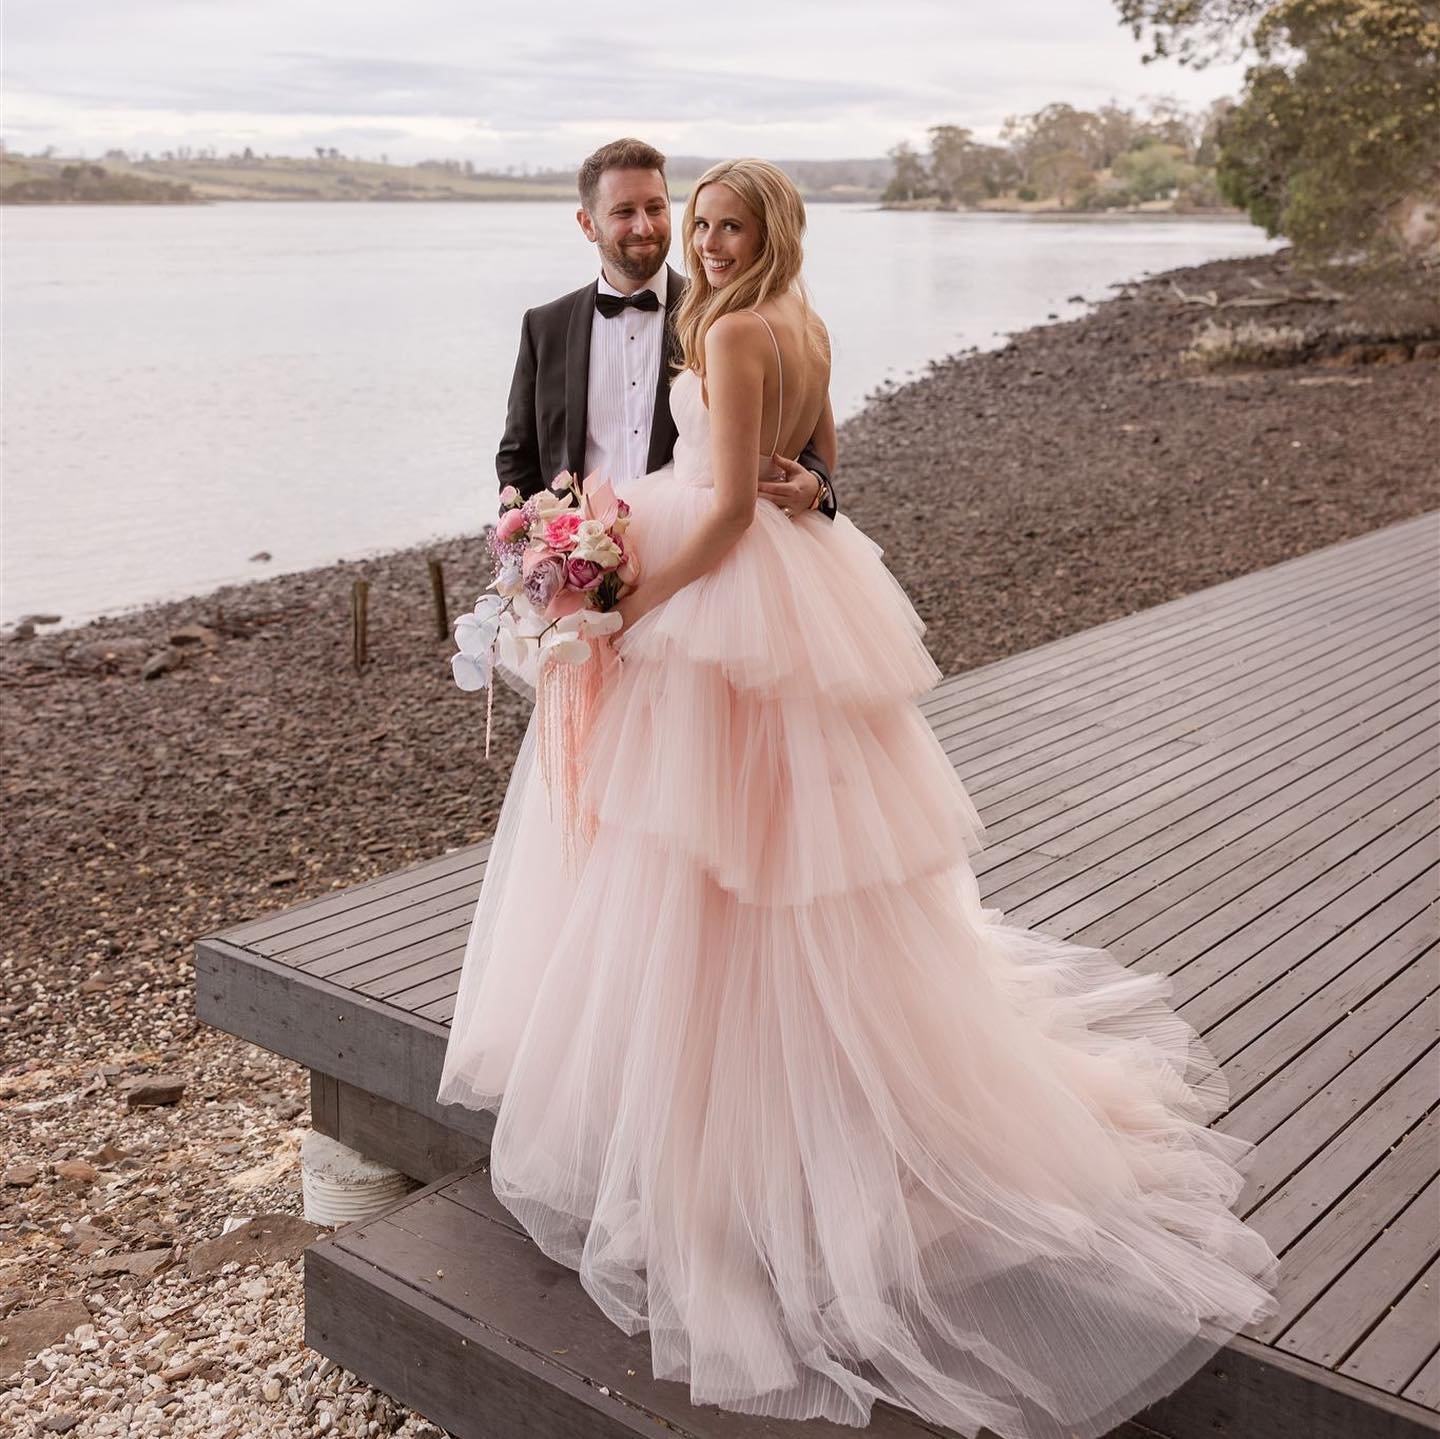 Elly + Tim&rsquo;s stunning wedding was recently featured in @hellomaymagazine alongside some very kind words the couple shared about us 🥰

&ldquo;@hubertanddan were a must from the moment we decided to get married in Launceston. They are widely kno